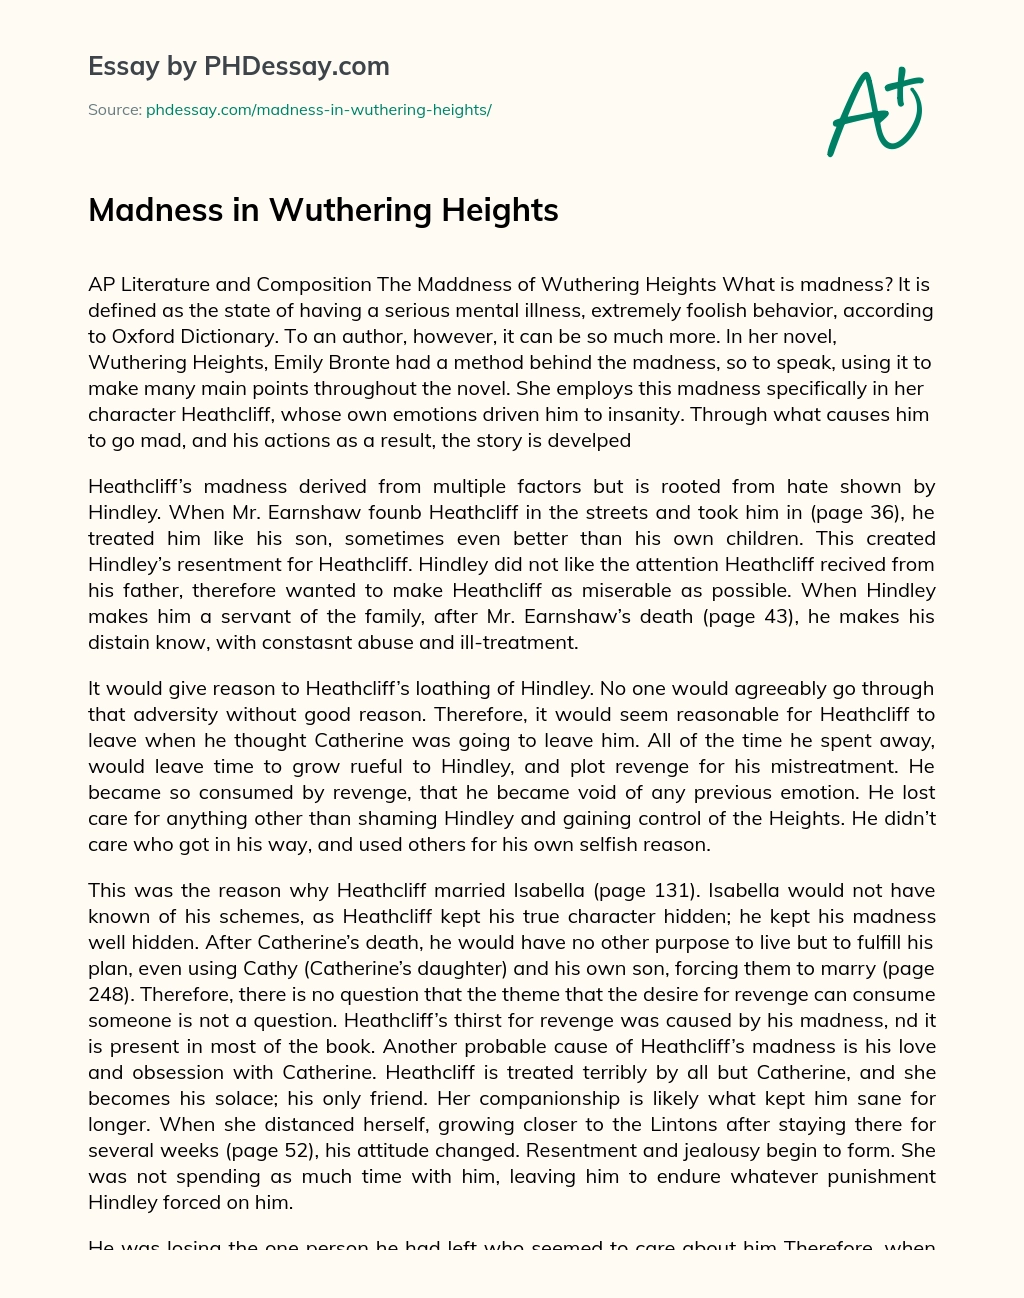 Madness in Wuthering Heights essay